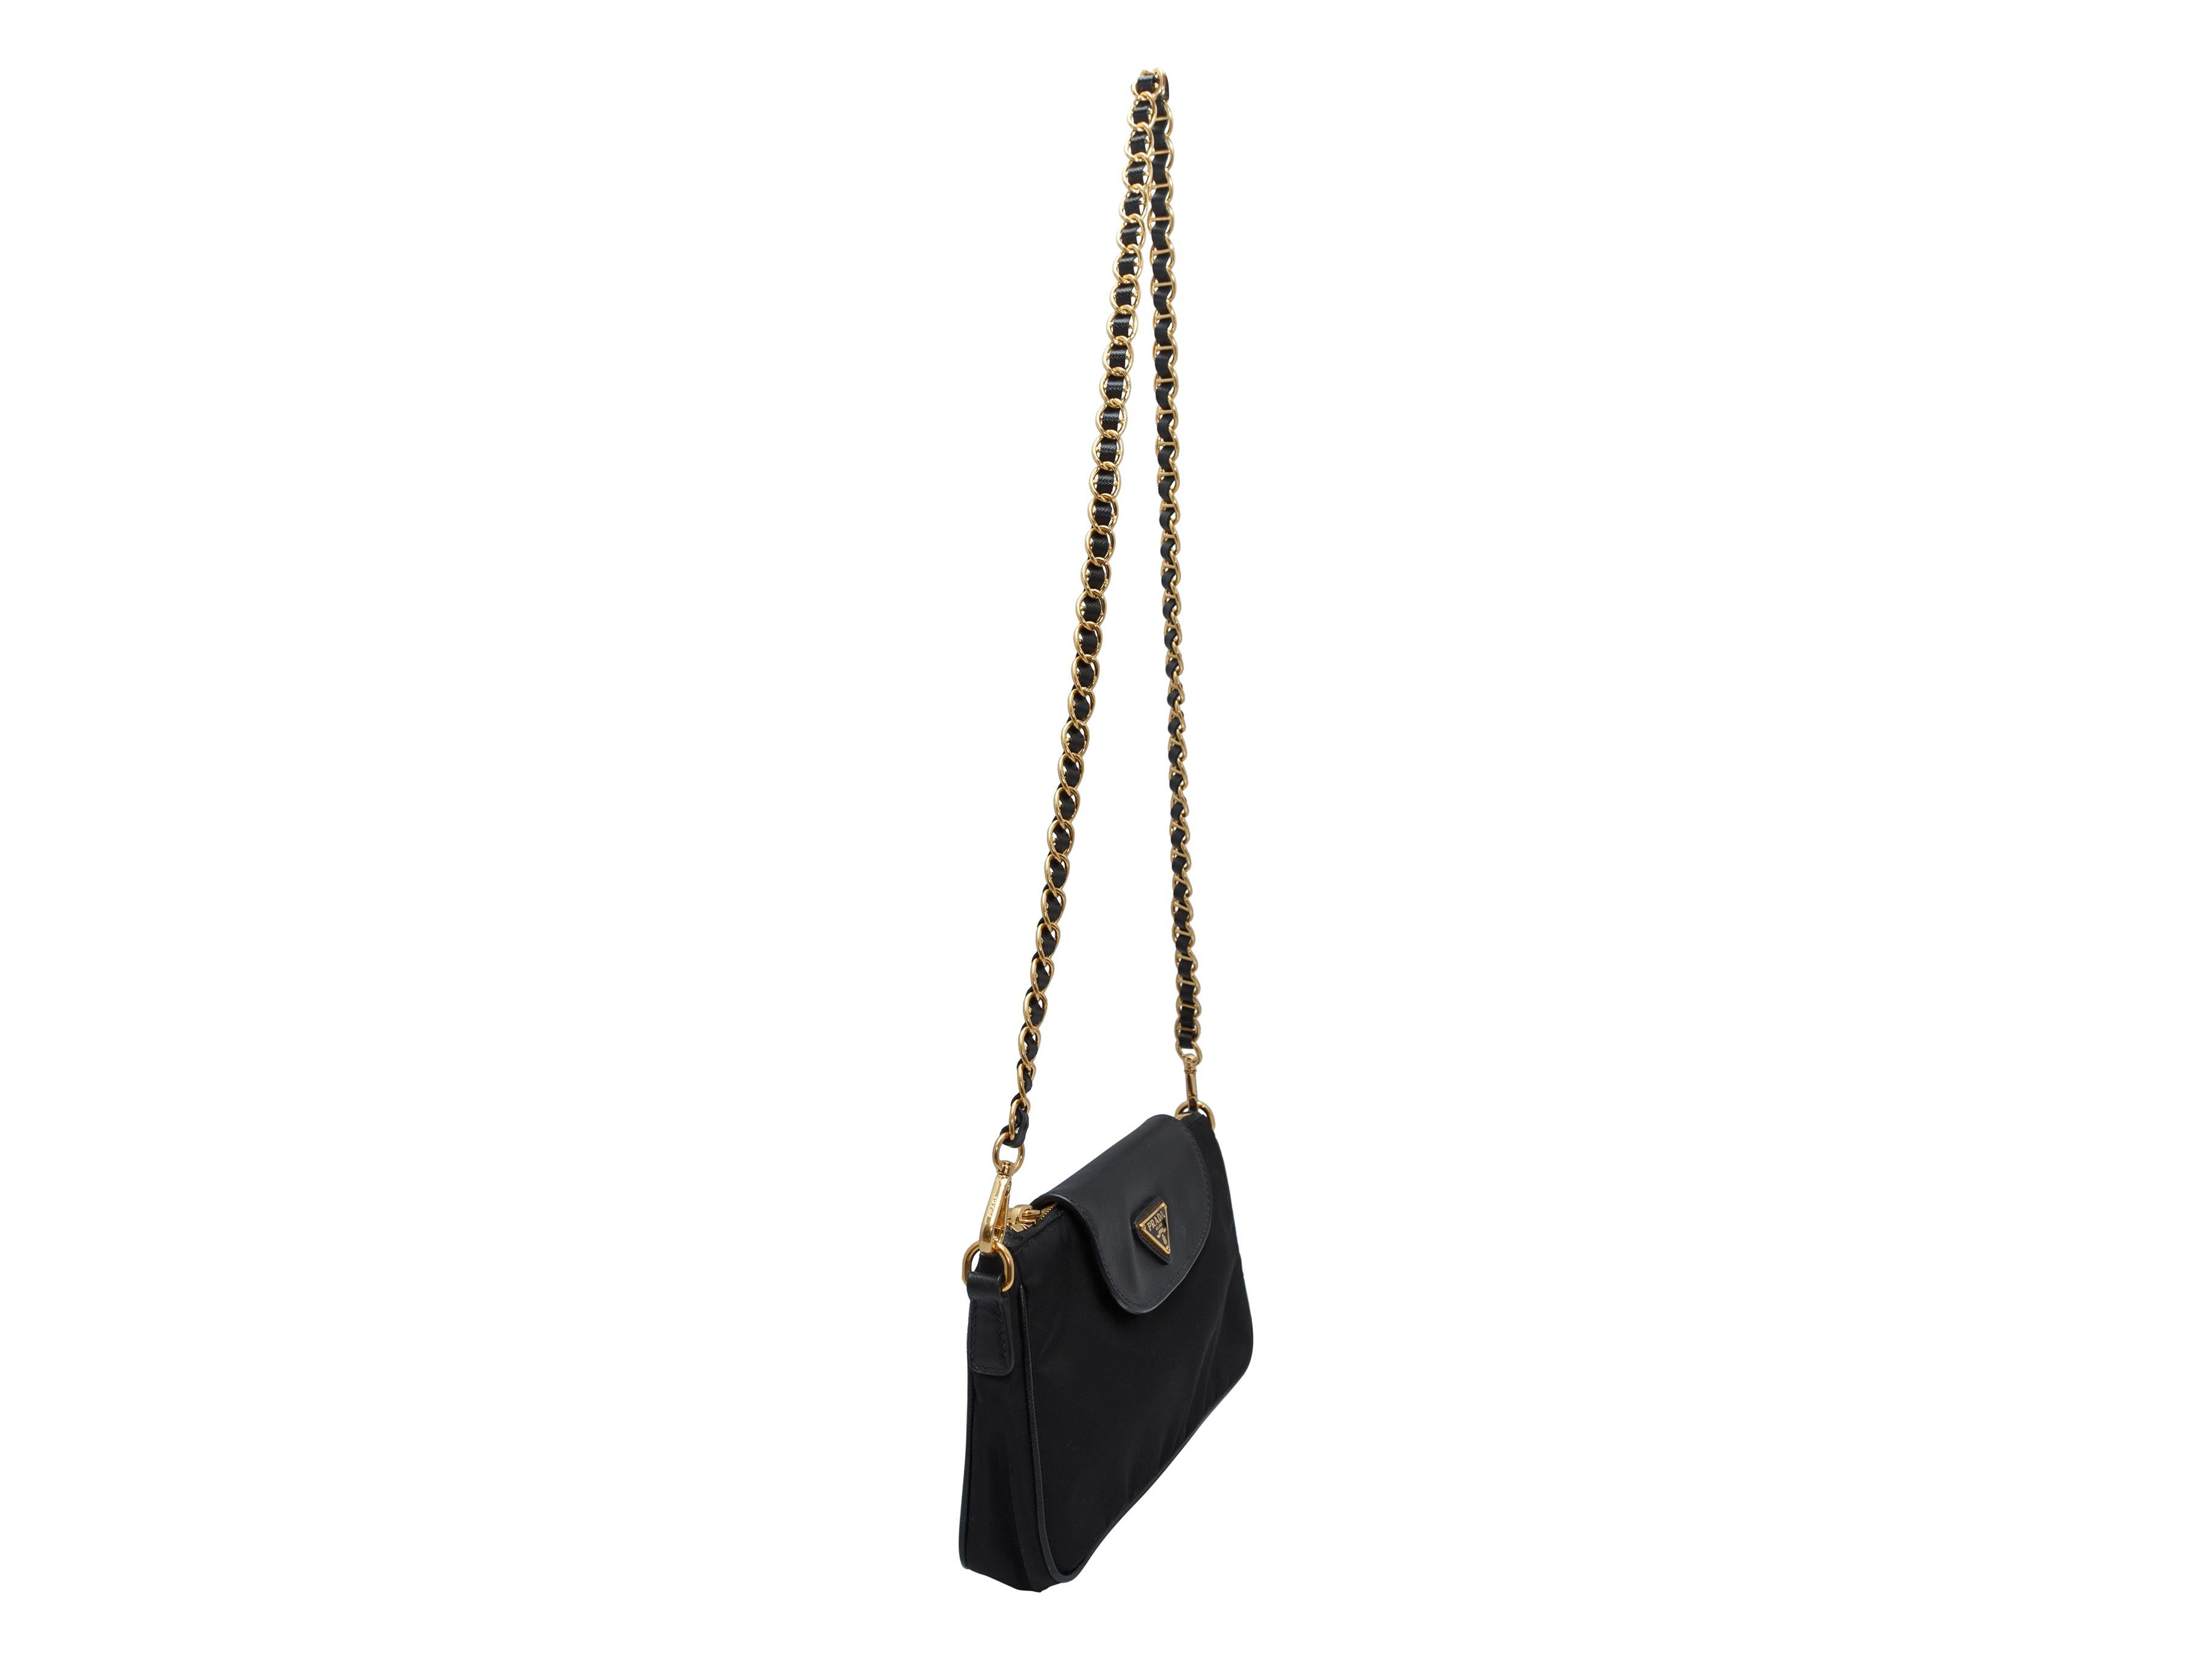 Product details: Black nylon and Saffiano leather mini bag by Prada. Gold-tone hardware. Chain strap. Zip closure at top. 8.75